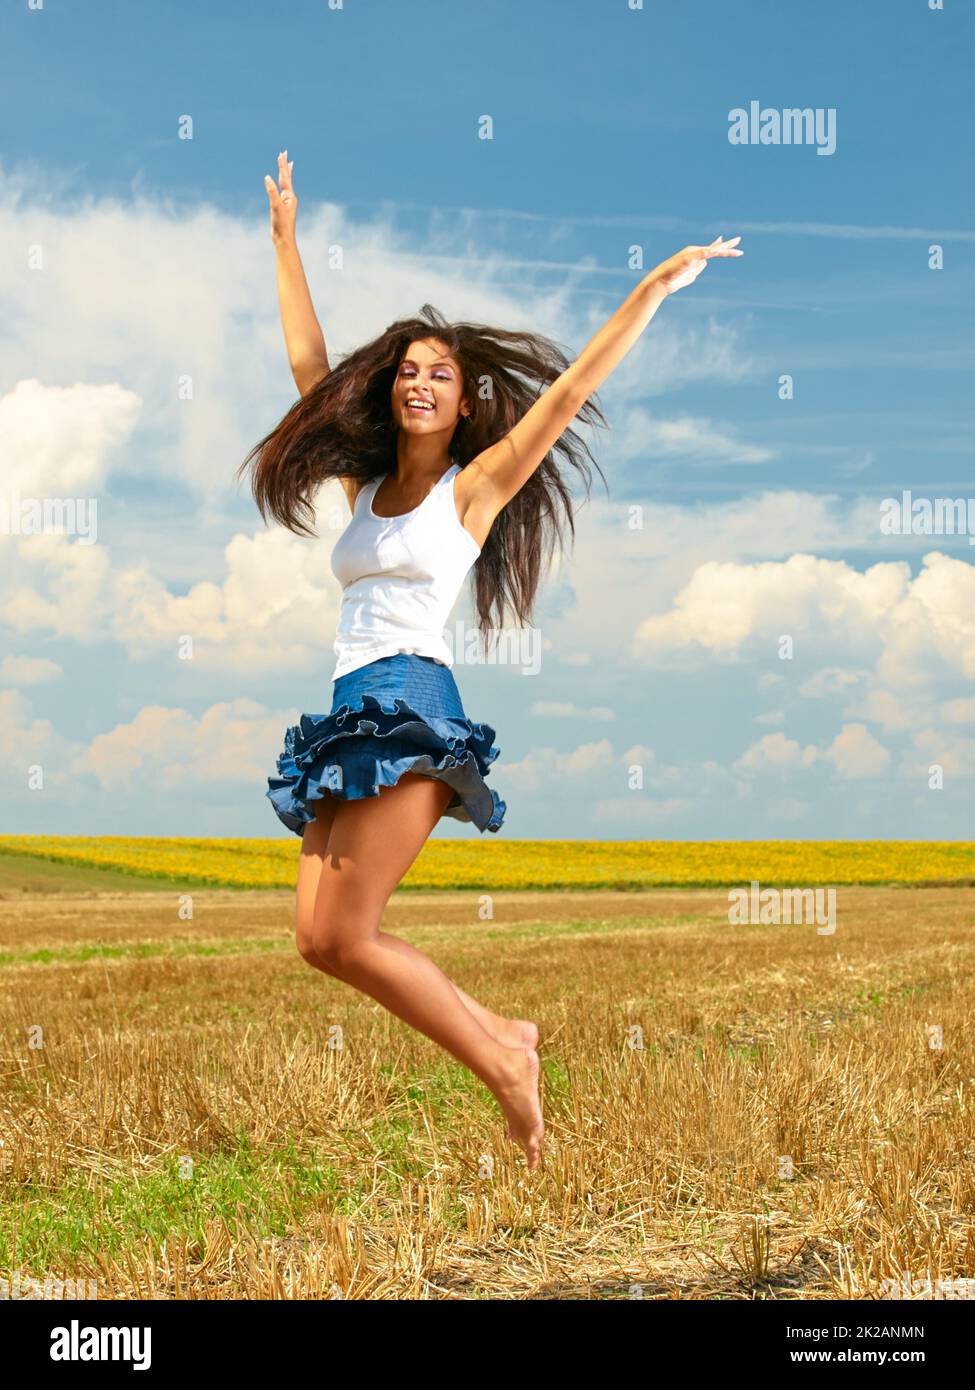 Im free. Shot of a beautiful young woman in the countryside with her arms outstretched in joy. Stock Photo